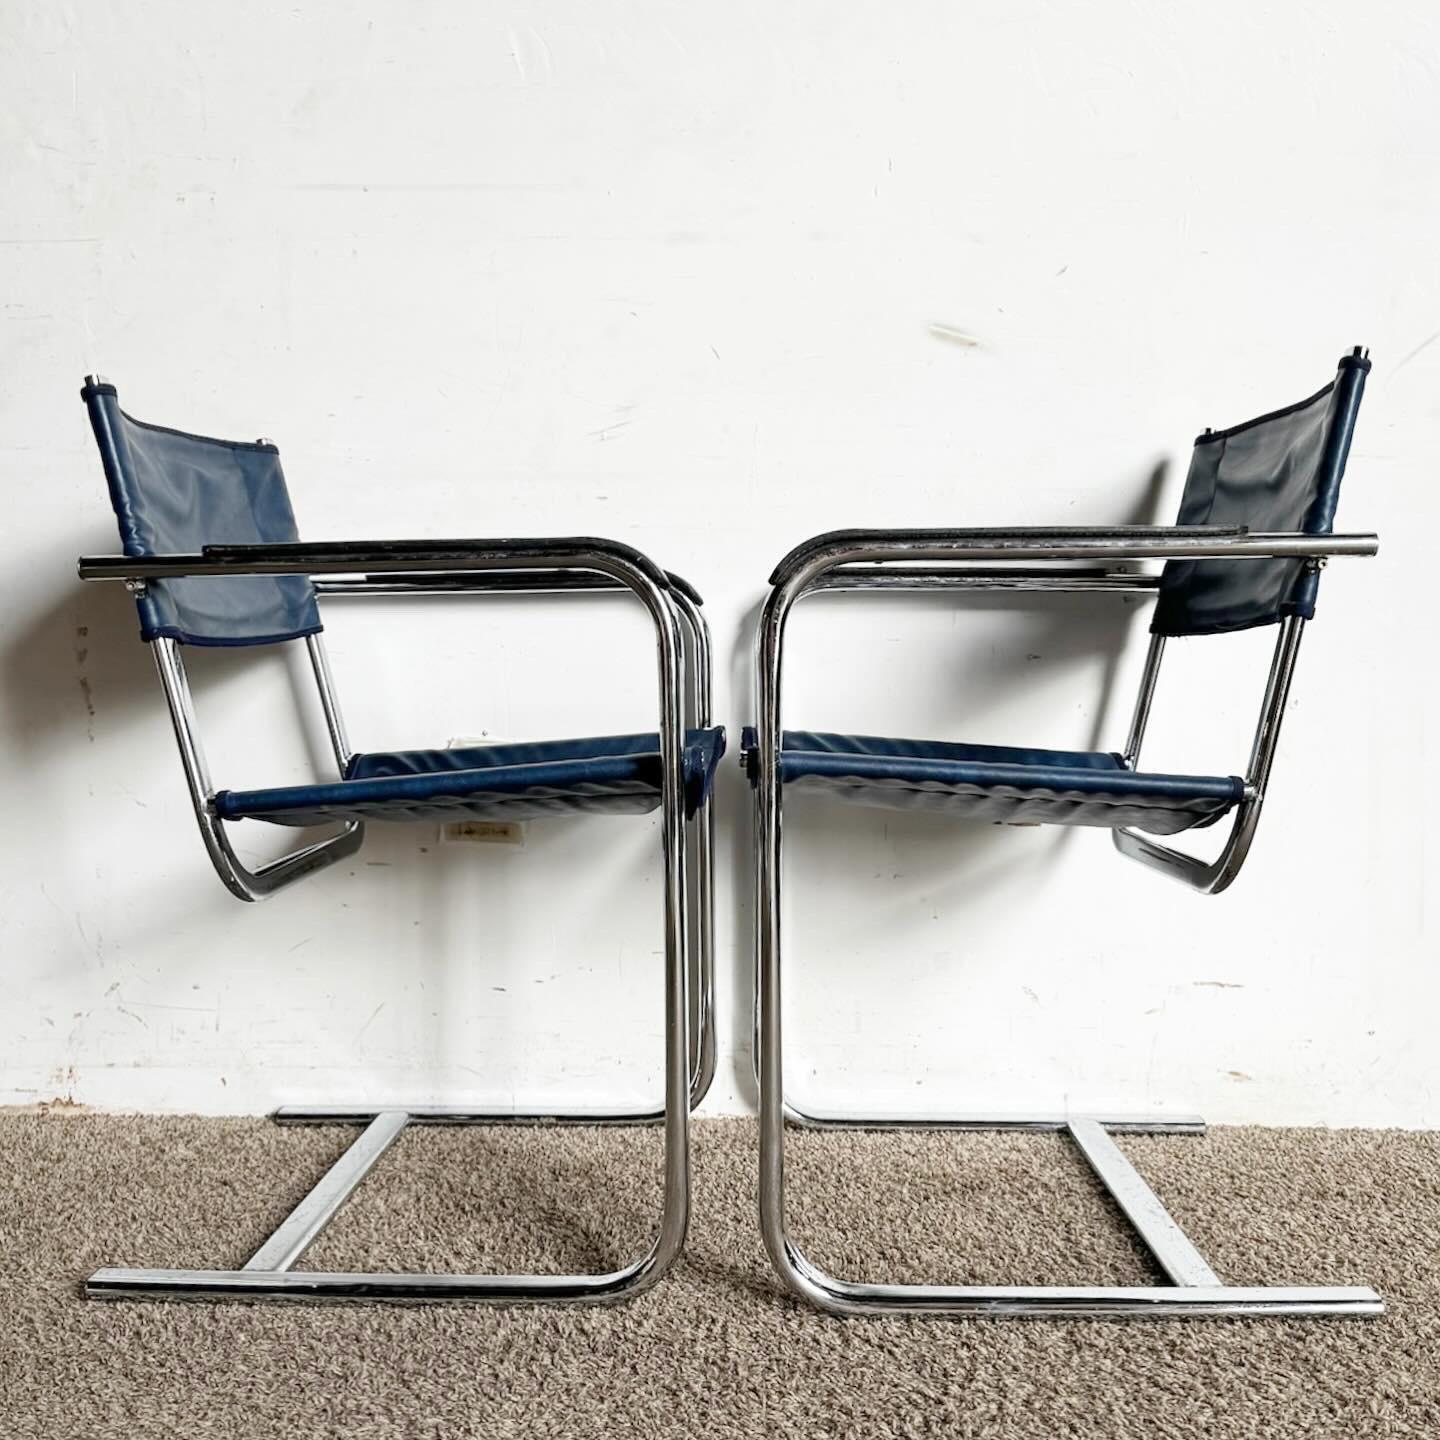 Elevate your dining area with the Blue Leather Chrome Cantilever Dining Arm Chairs. These modern chairs blend blue leather with chrome frames for a sophisticated look, ideal for stylish homes.
Some wear to the leather and pitting as seen in the